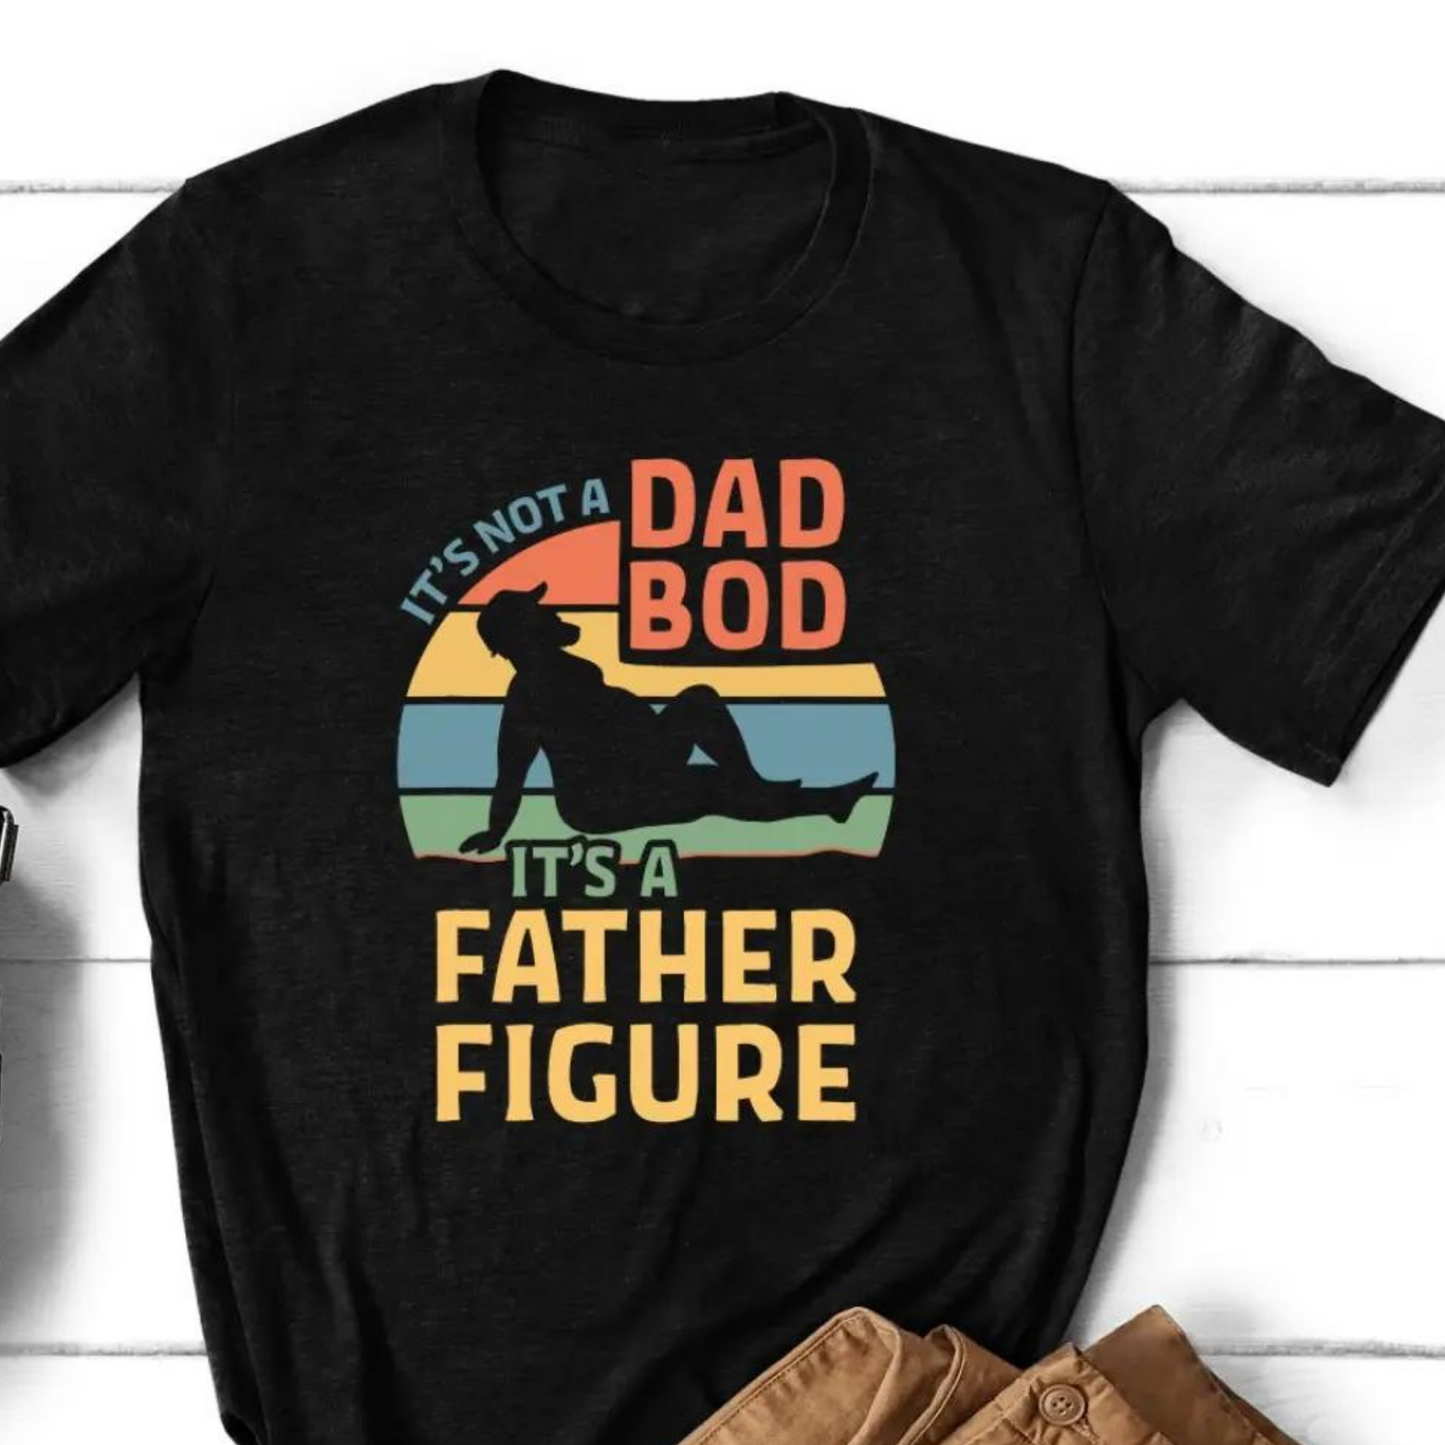 It's Not A Dad Bod Graphic Tee, Black